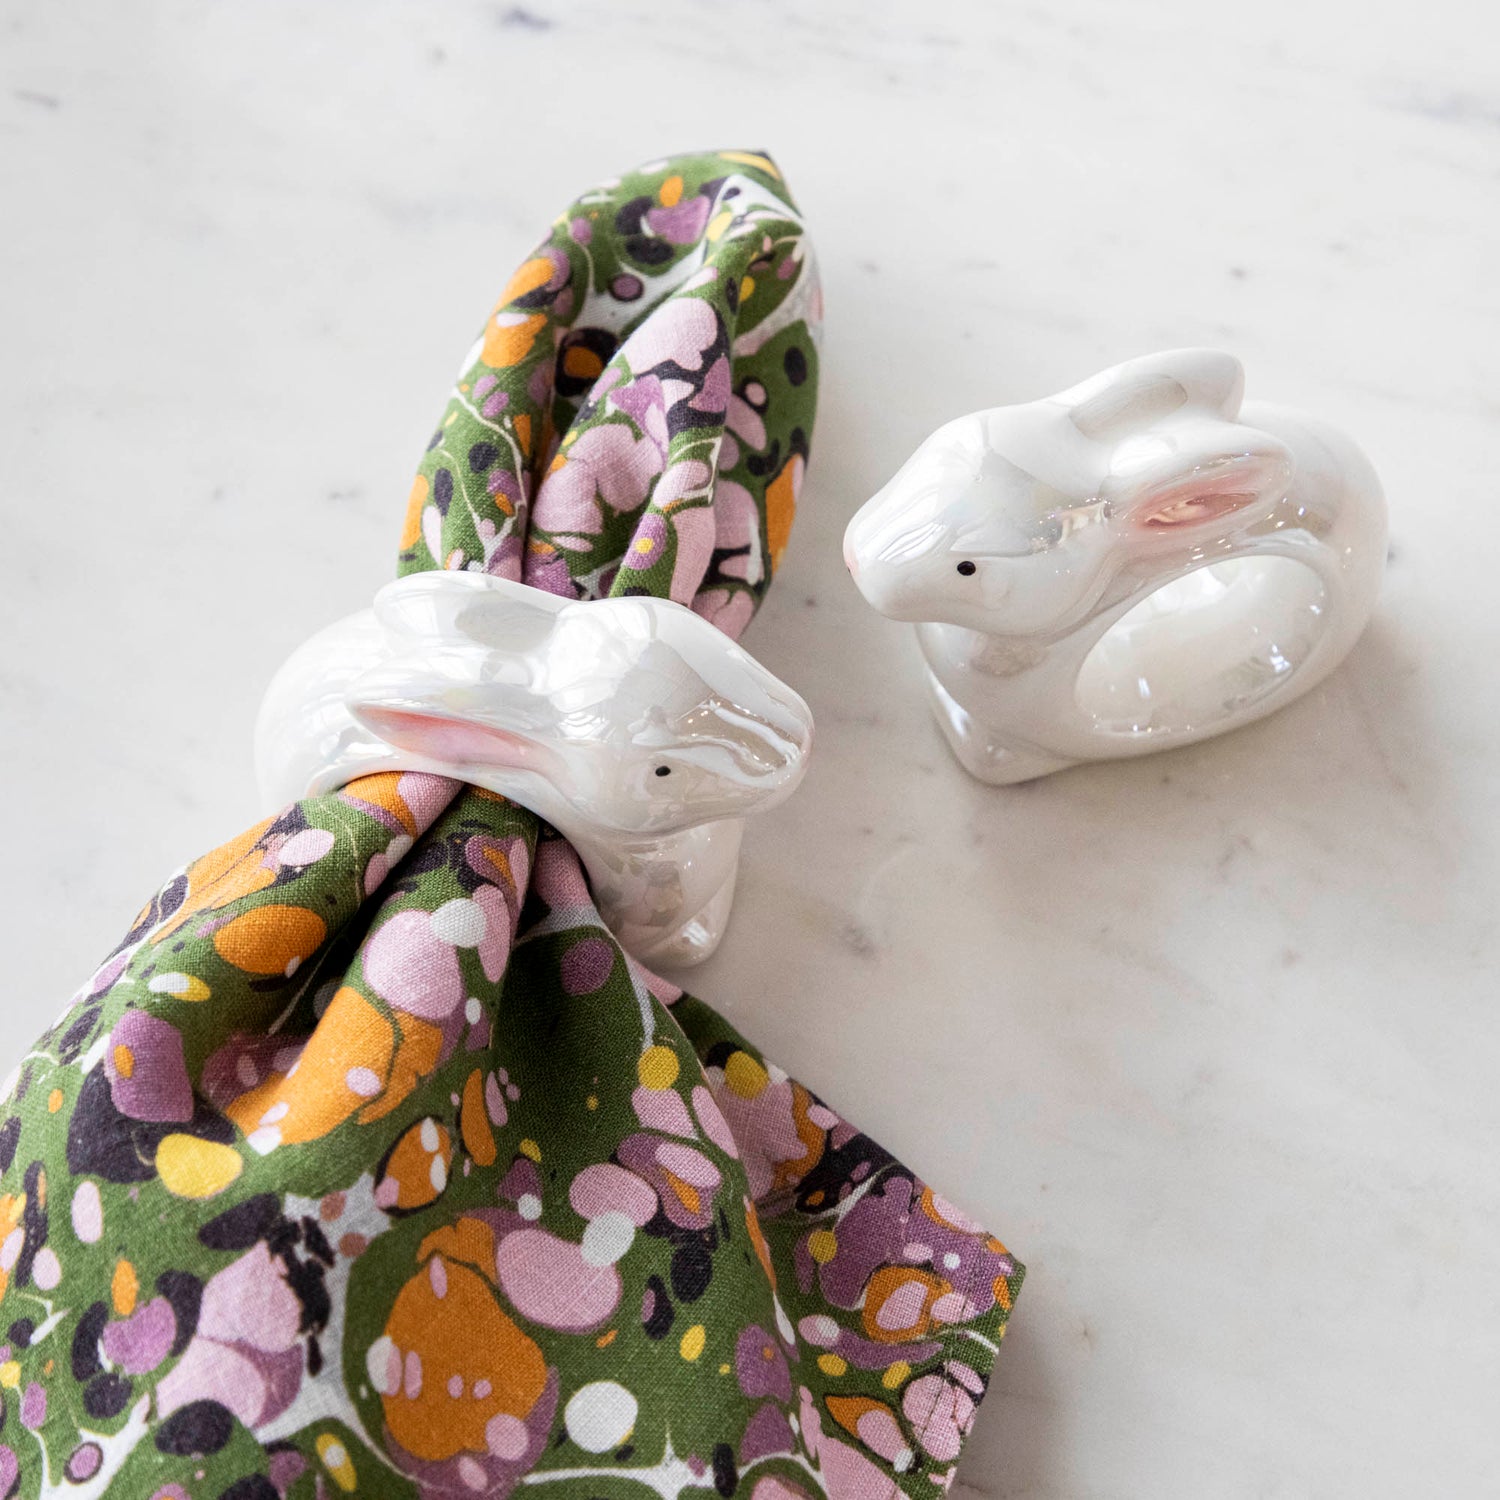 Two Glitterville Bunny Napkin Rings with a springy touch on a napkin.